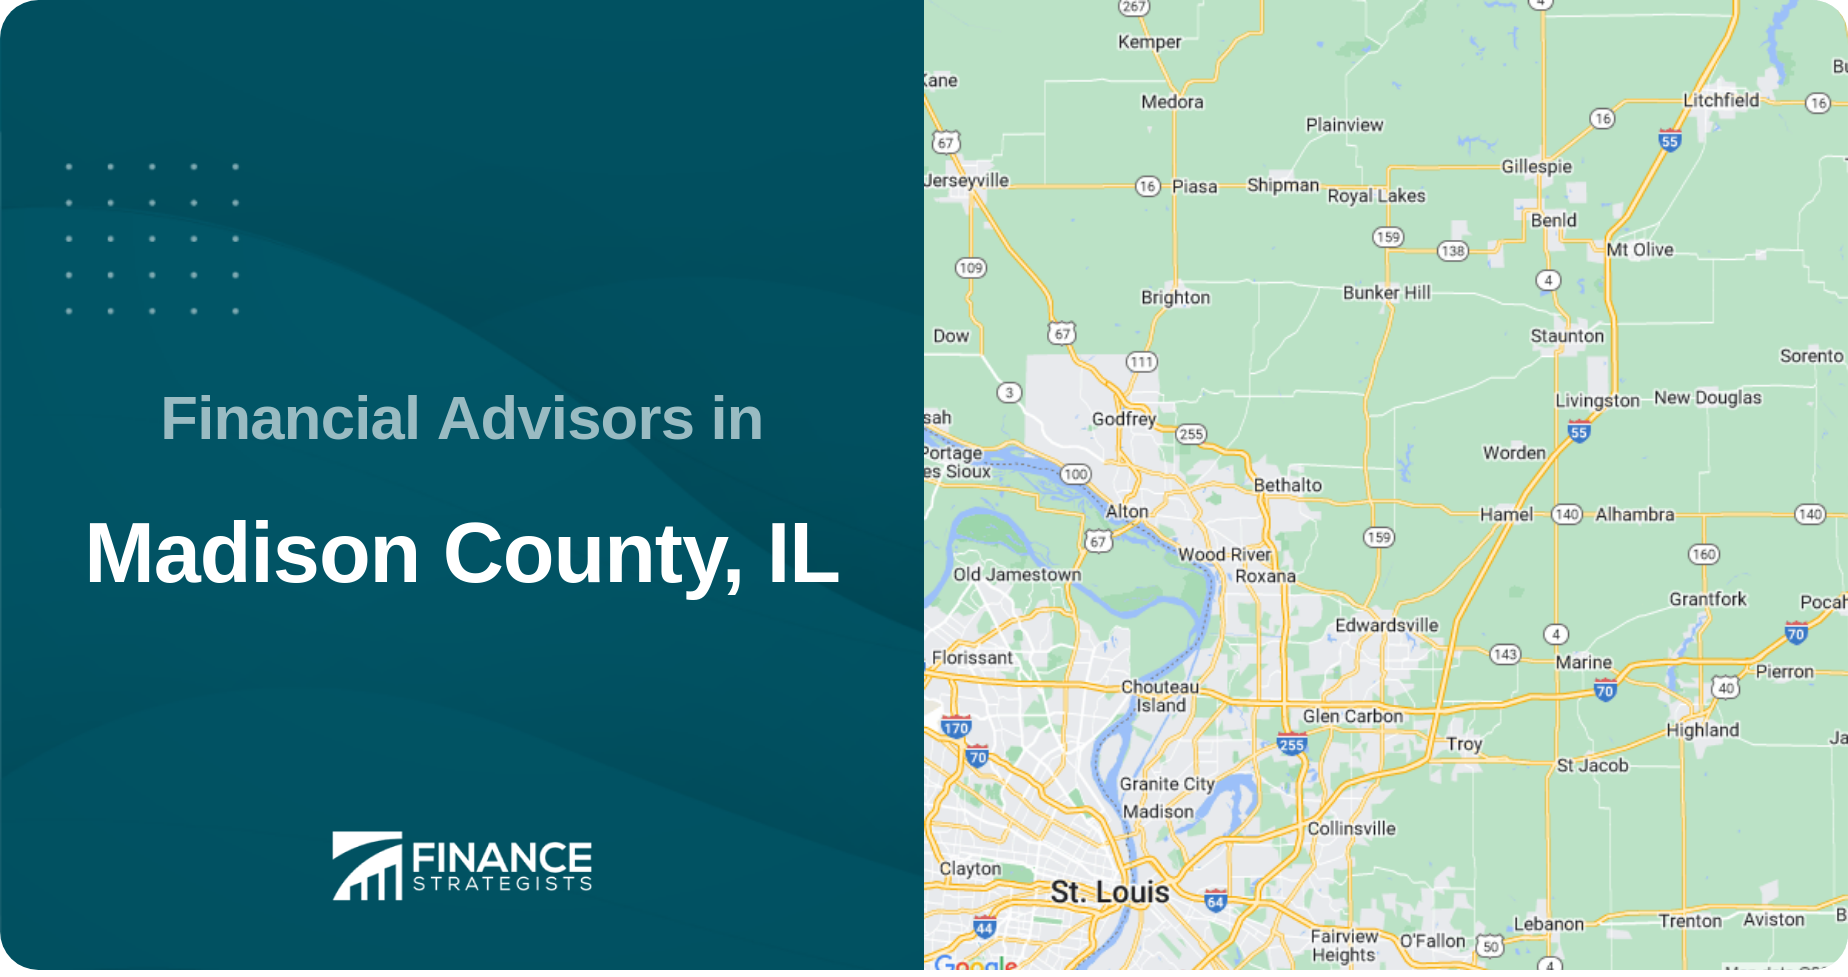 Financial Advisors in Madison County, IL